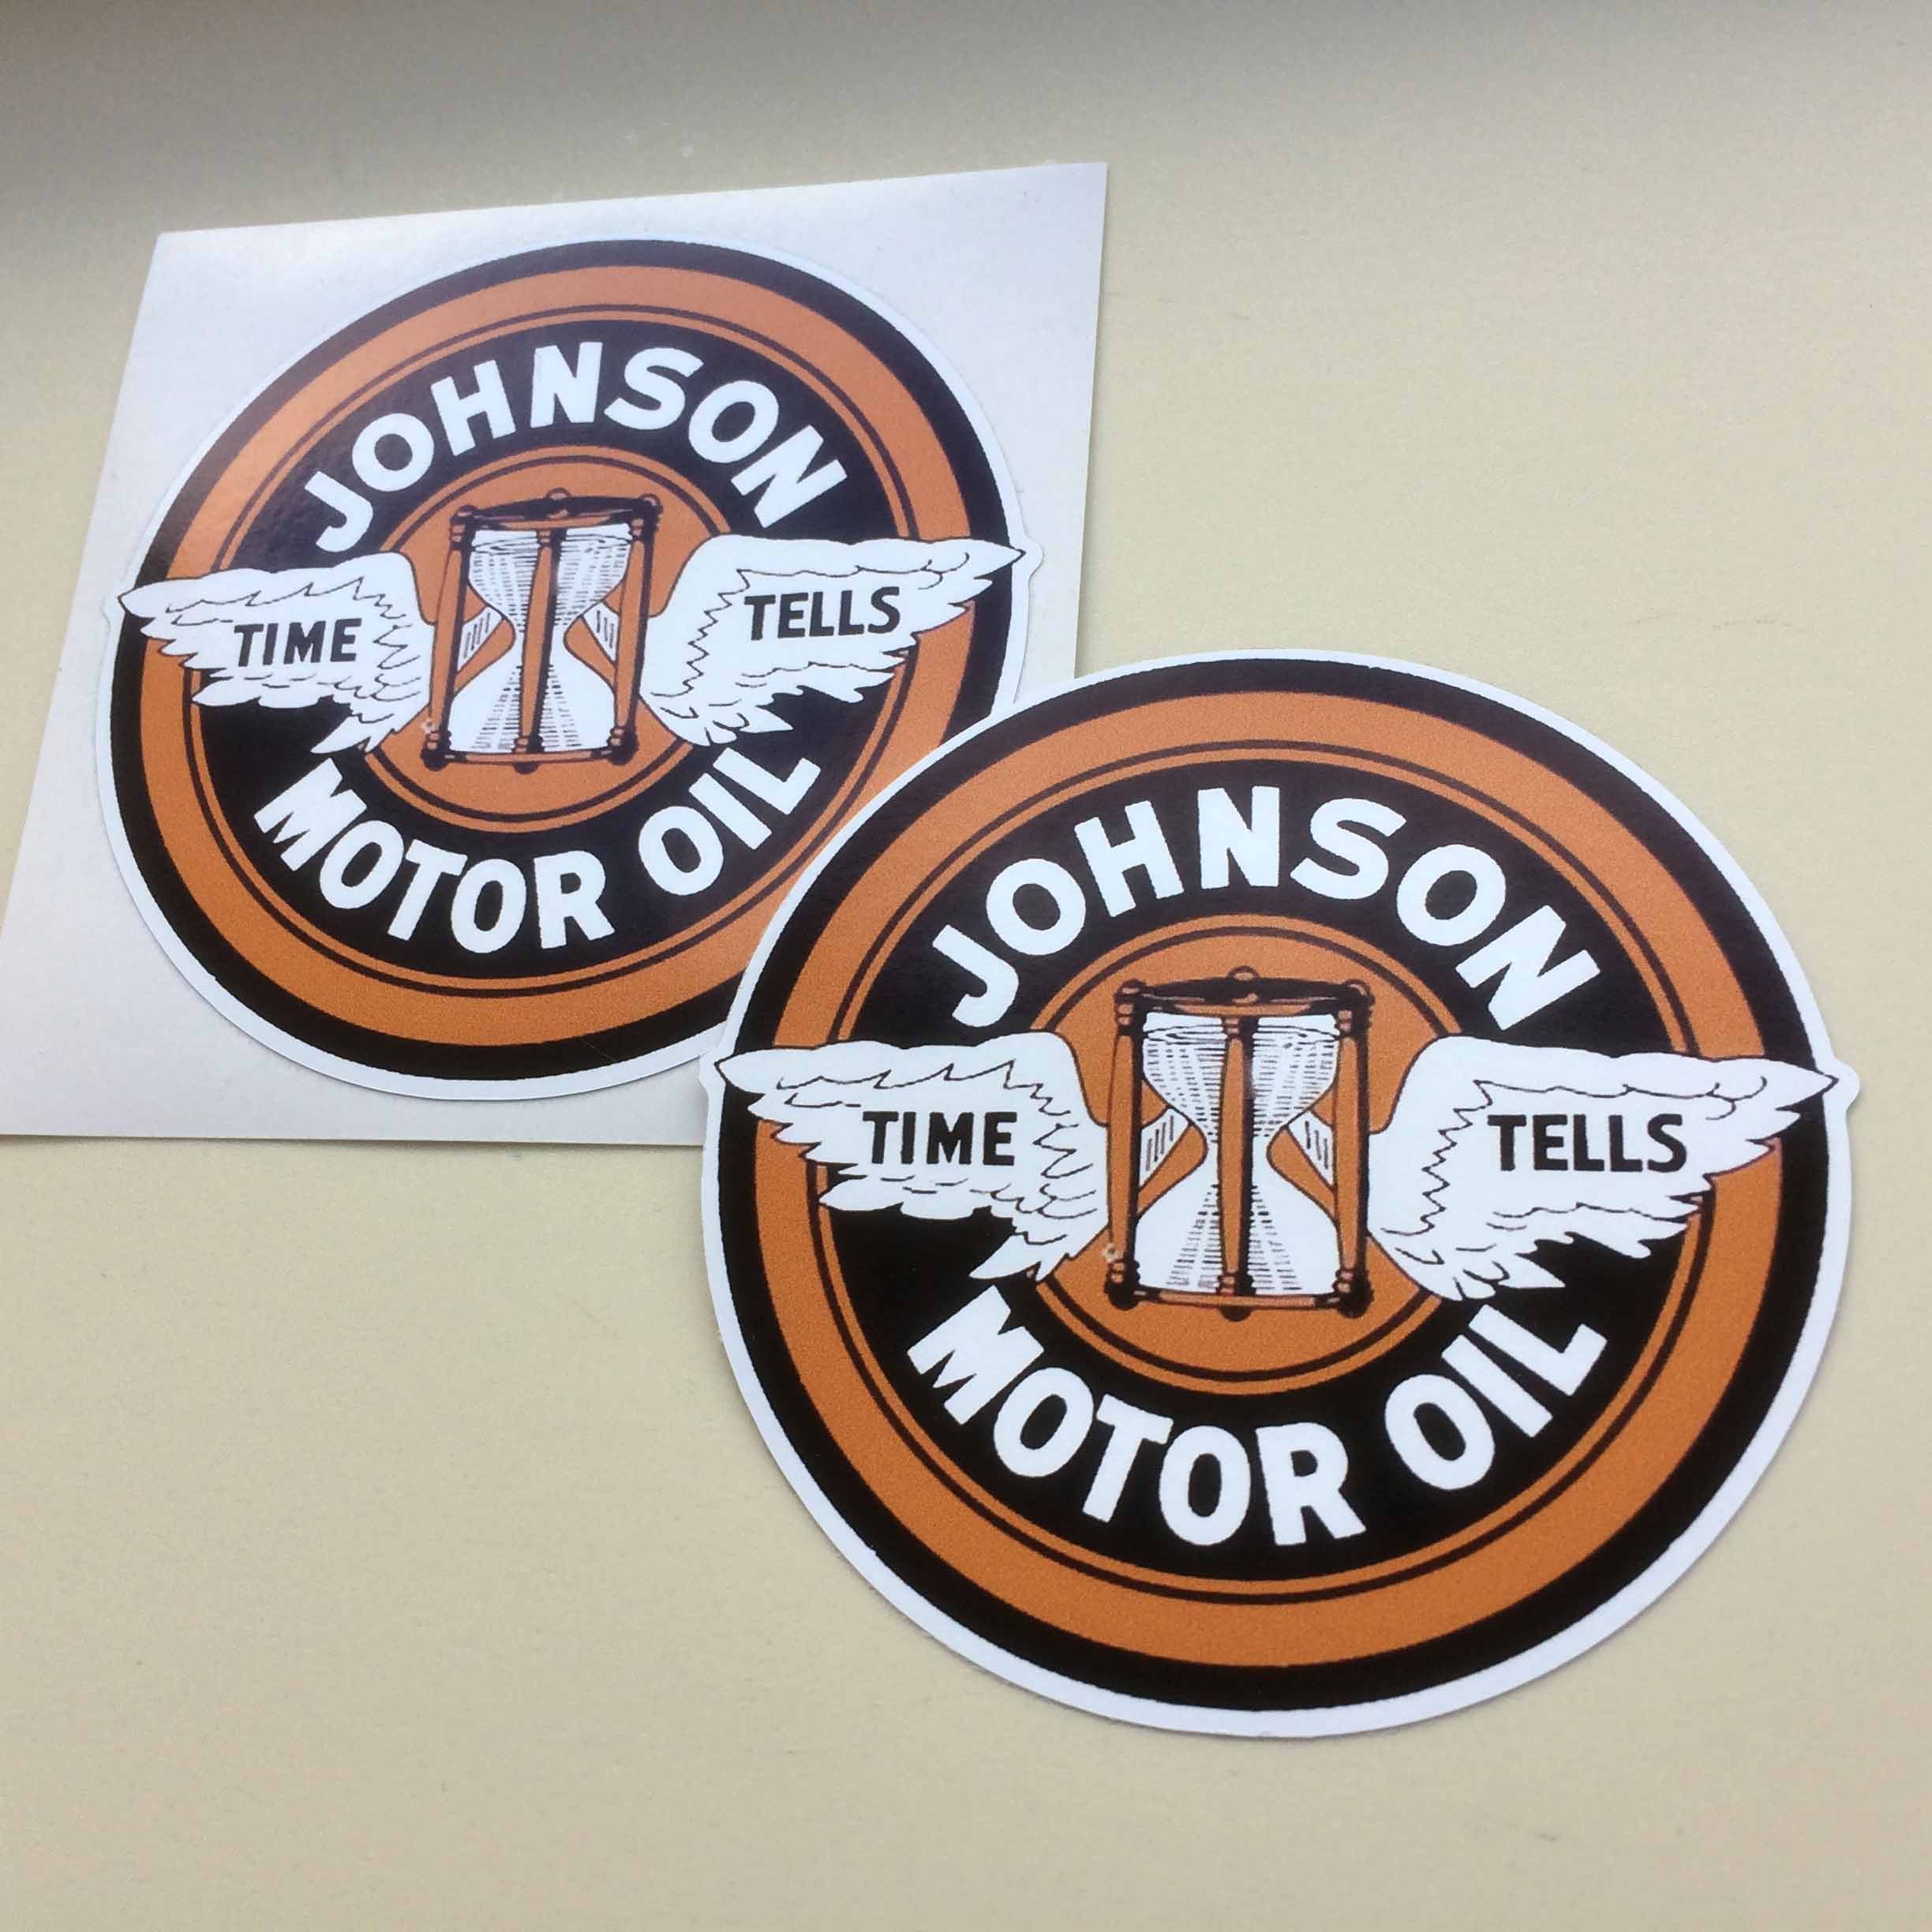 JOHNSON MOTOR OIL STICKER. Johnson Motor Oil in white lettering surrounds an hourglass with white wings emblazoned with Time Tells. On a background of concentric circles in brown and black.